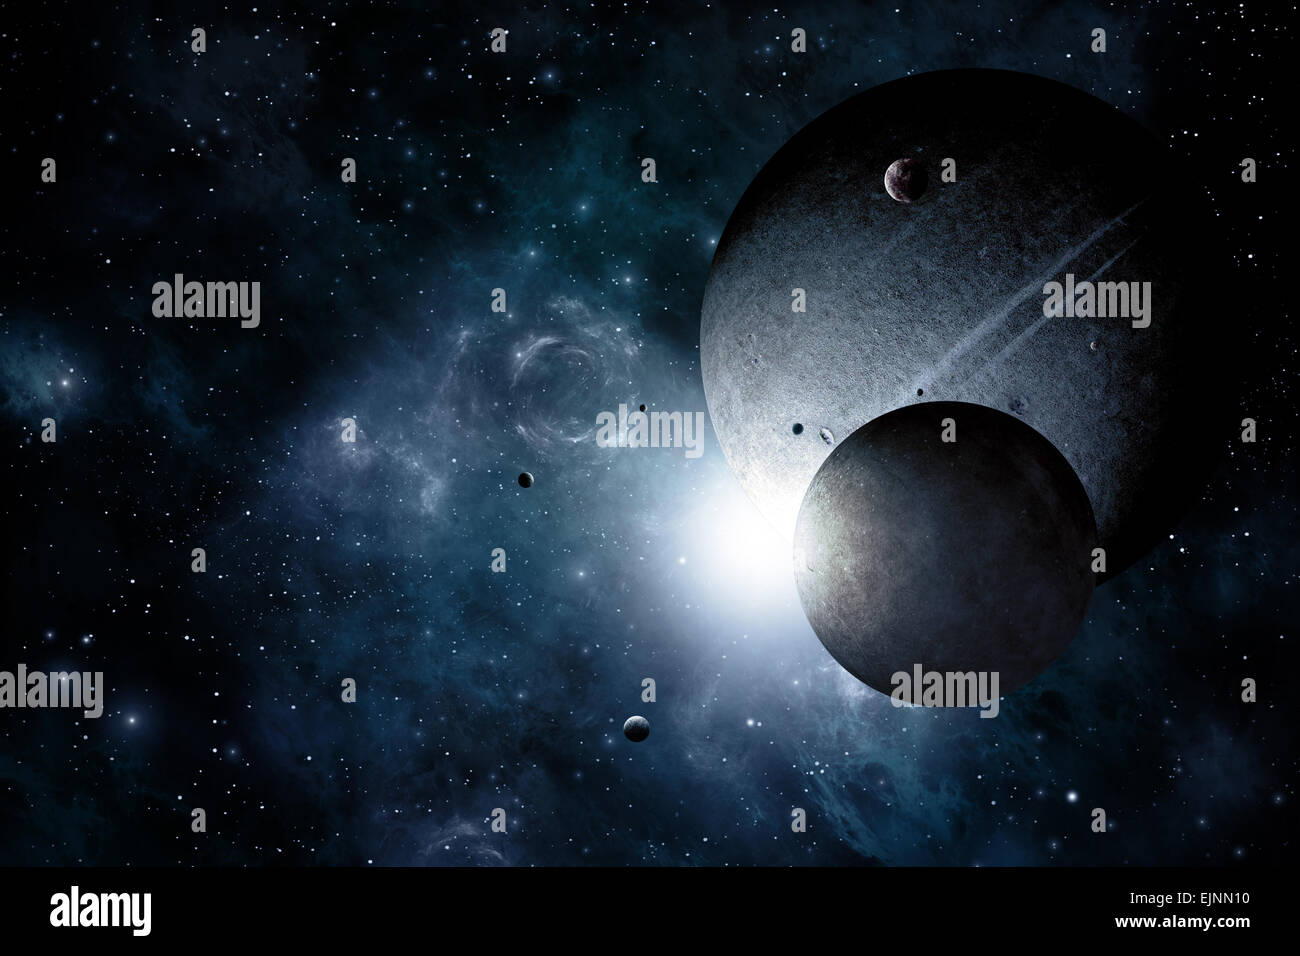 blue deep space abstract imaginary illustration with planets and moons Stock Photo